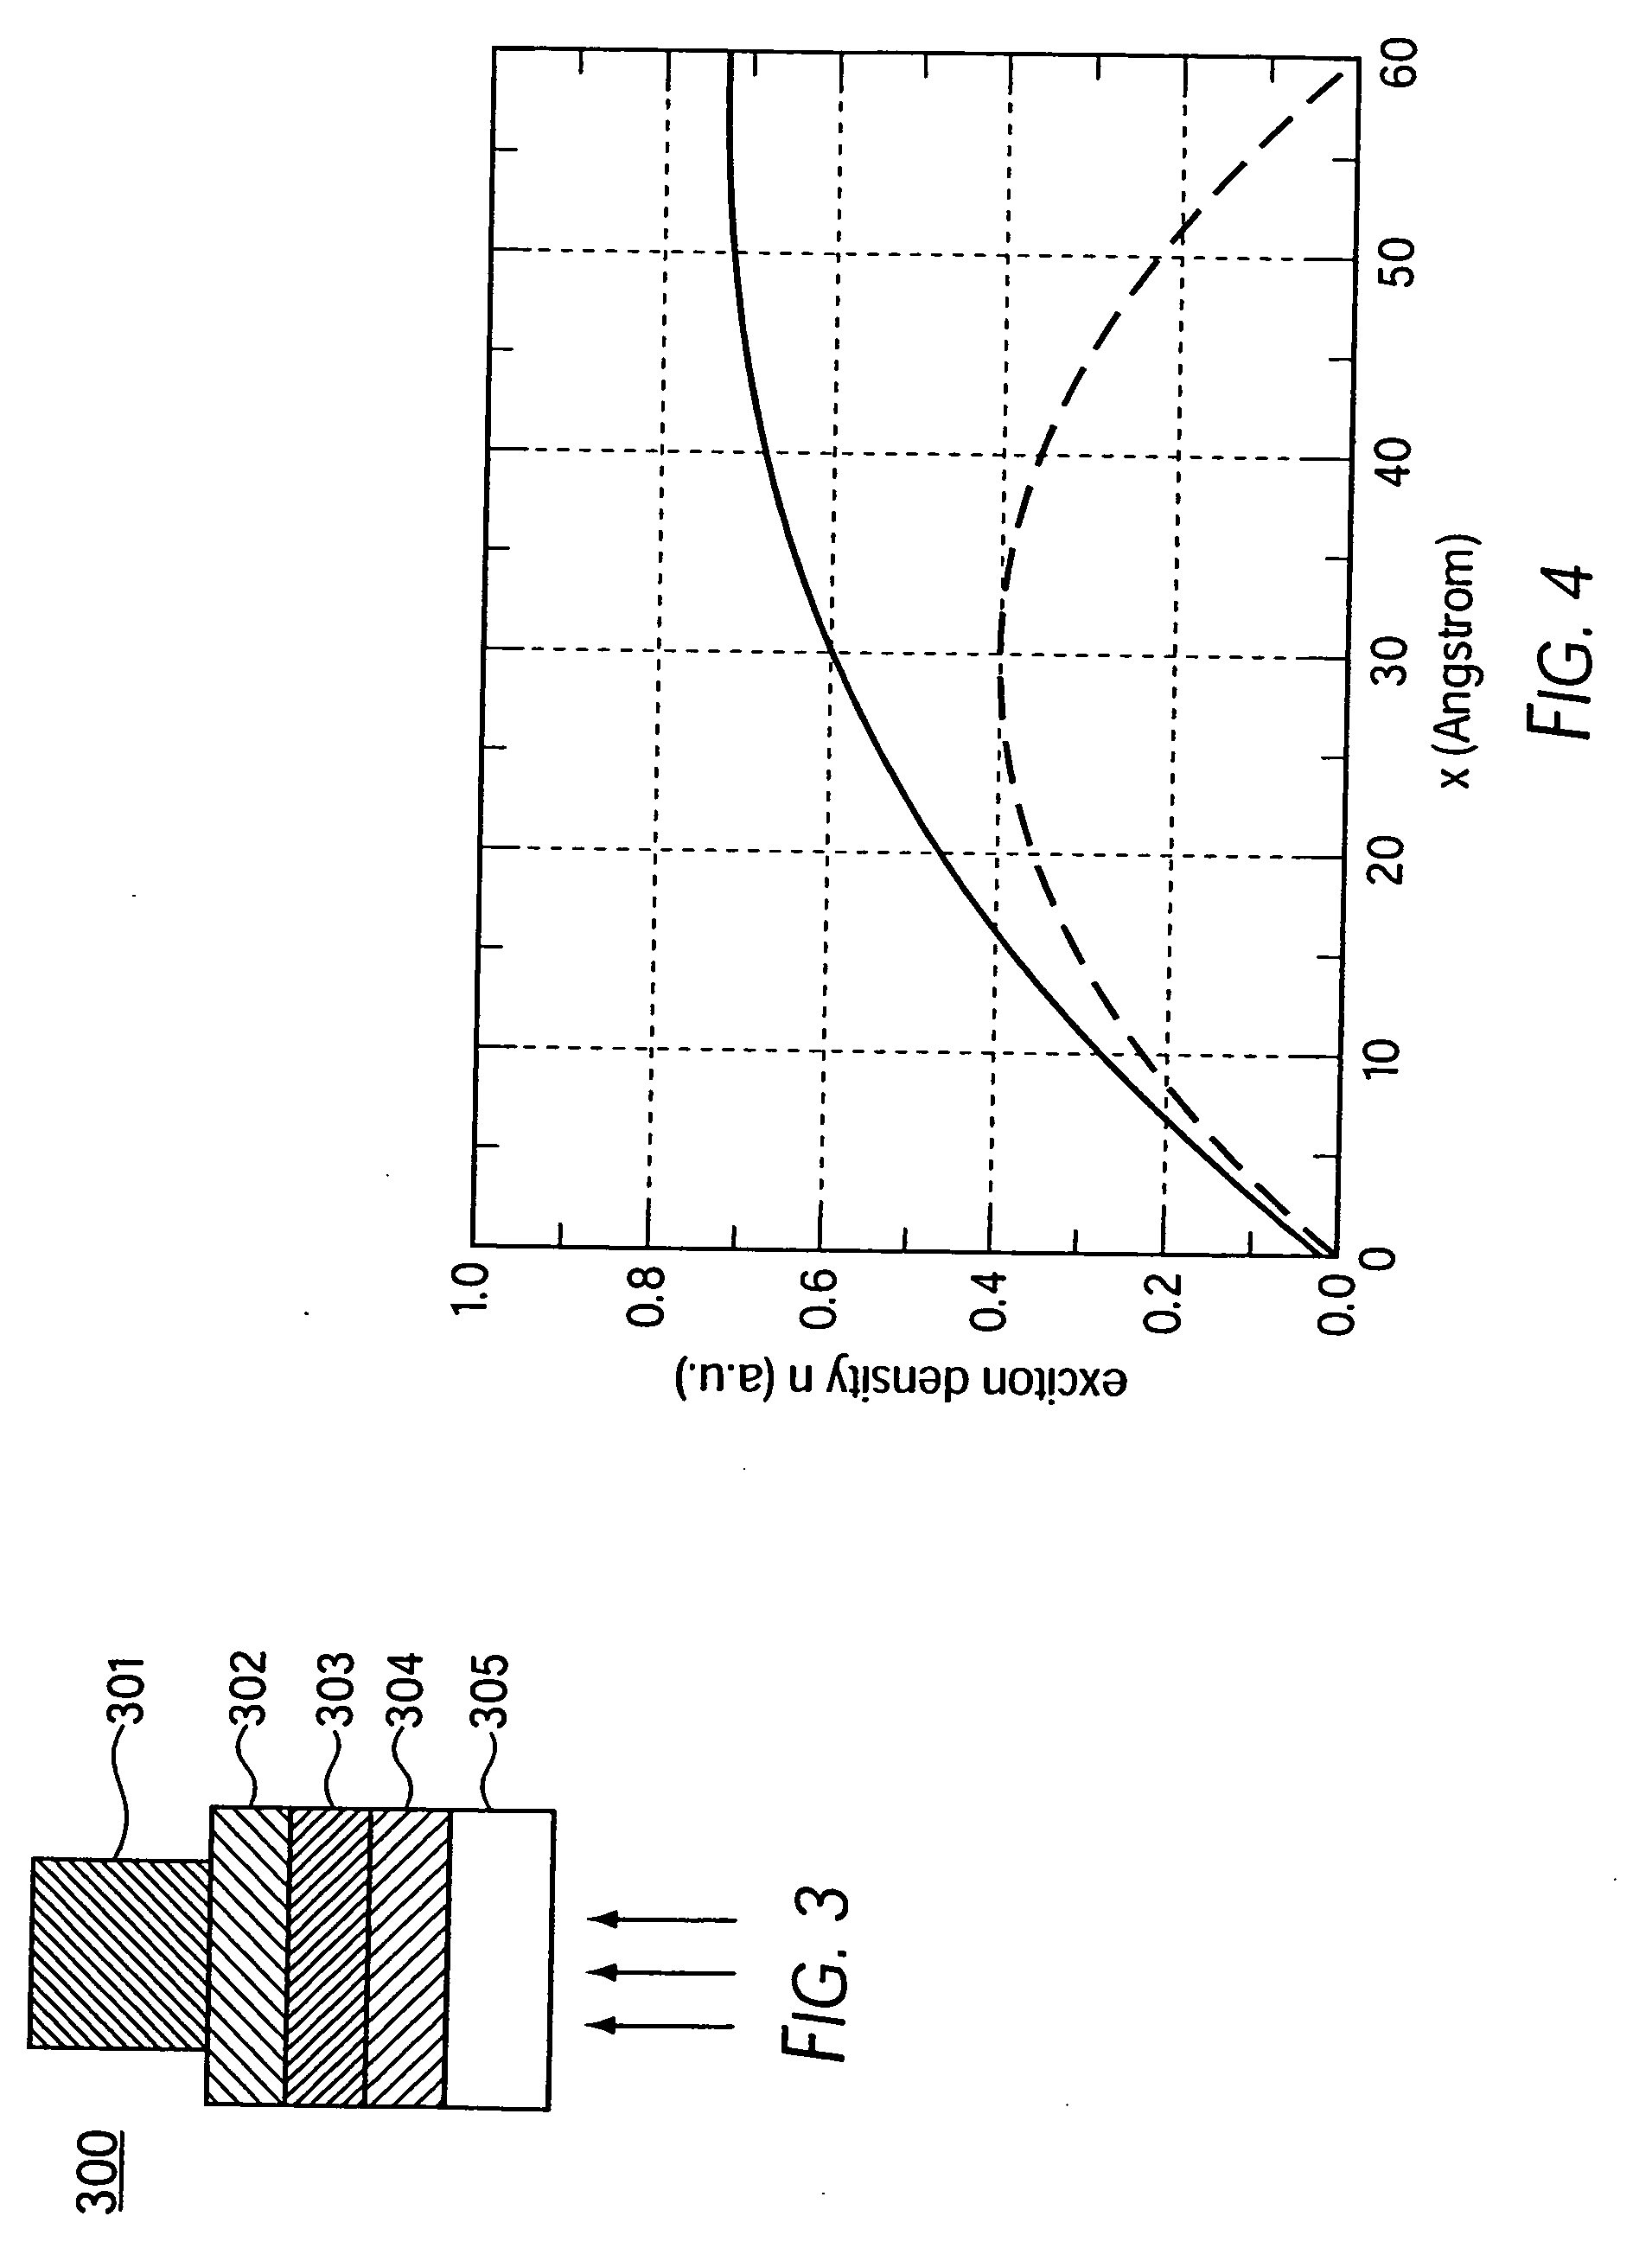 Organic photosensitive optoelectronic device with an exciton blocking layer